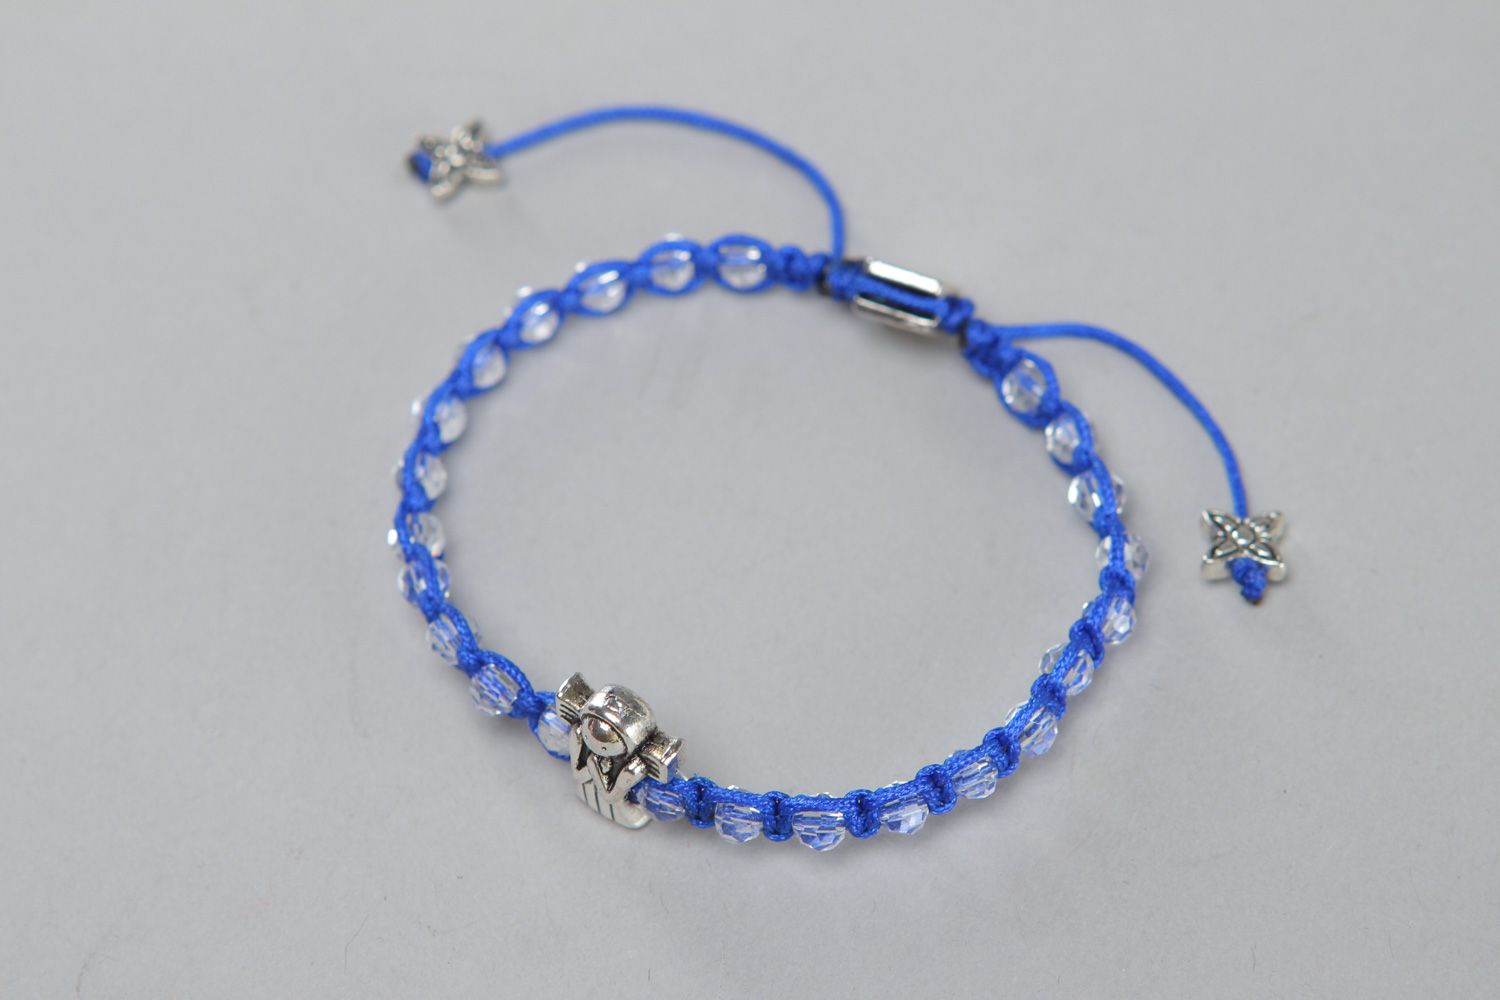 Handmade friendship wrist bracelet woven of blue cord with beads and metal element photo 1